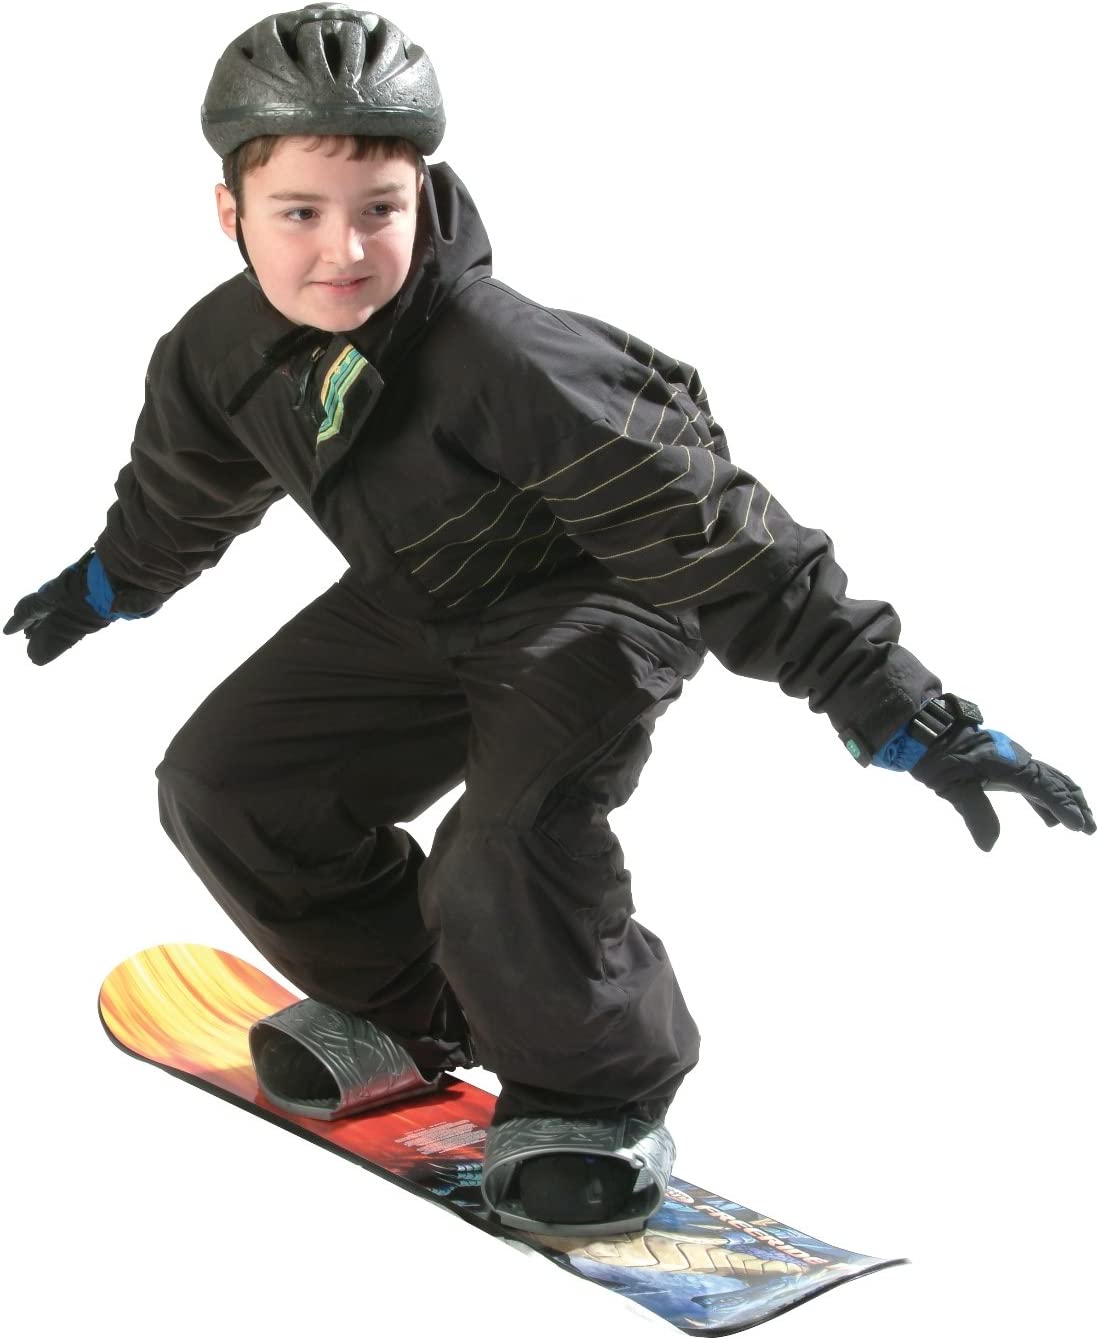 Emsco Group ESP 110 cm Freeride Snowboard - Adjustable Bindings - for Beginners and Experienced Riders, Graphic